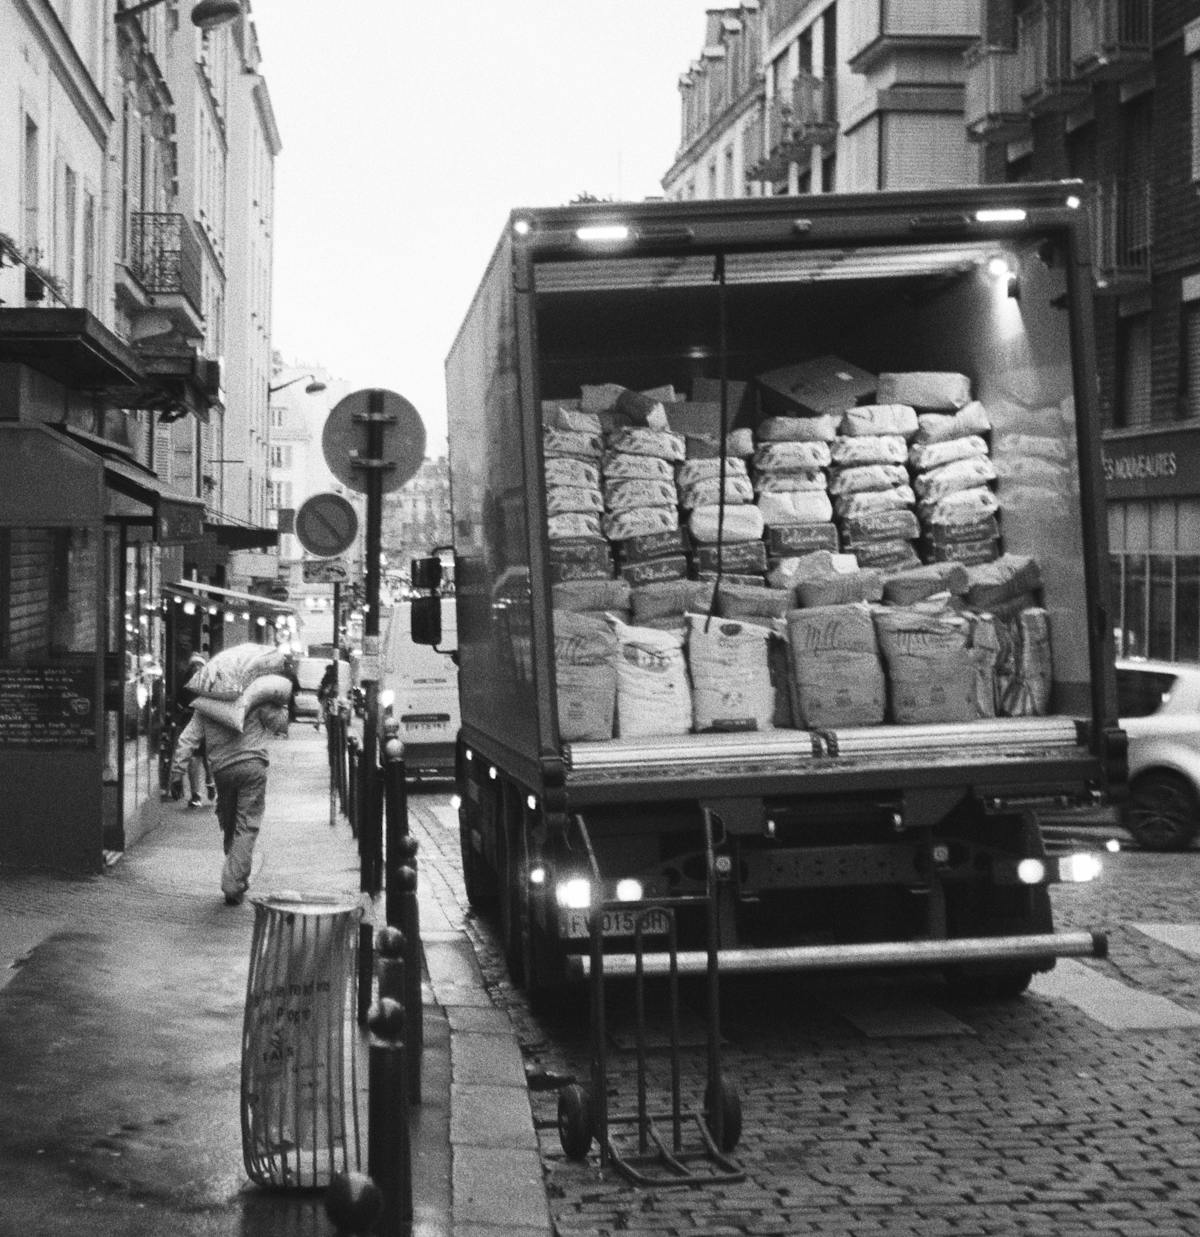 A man unloads flour from a delivery truck